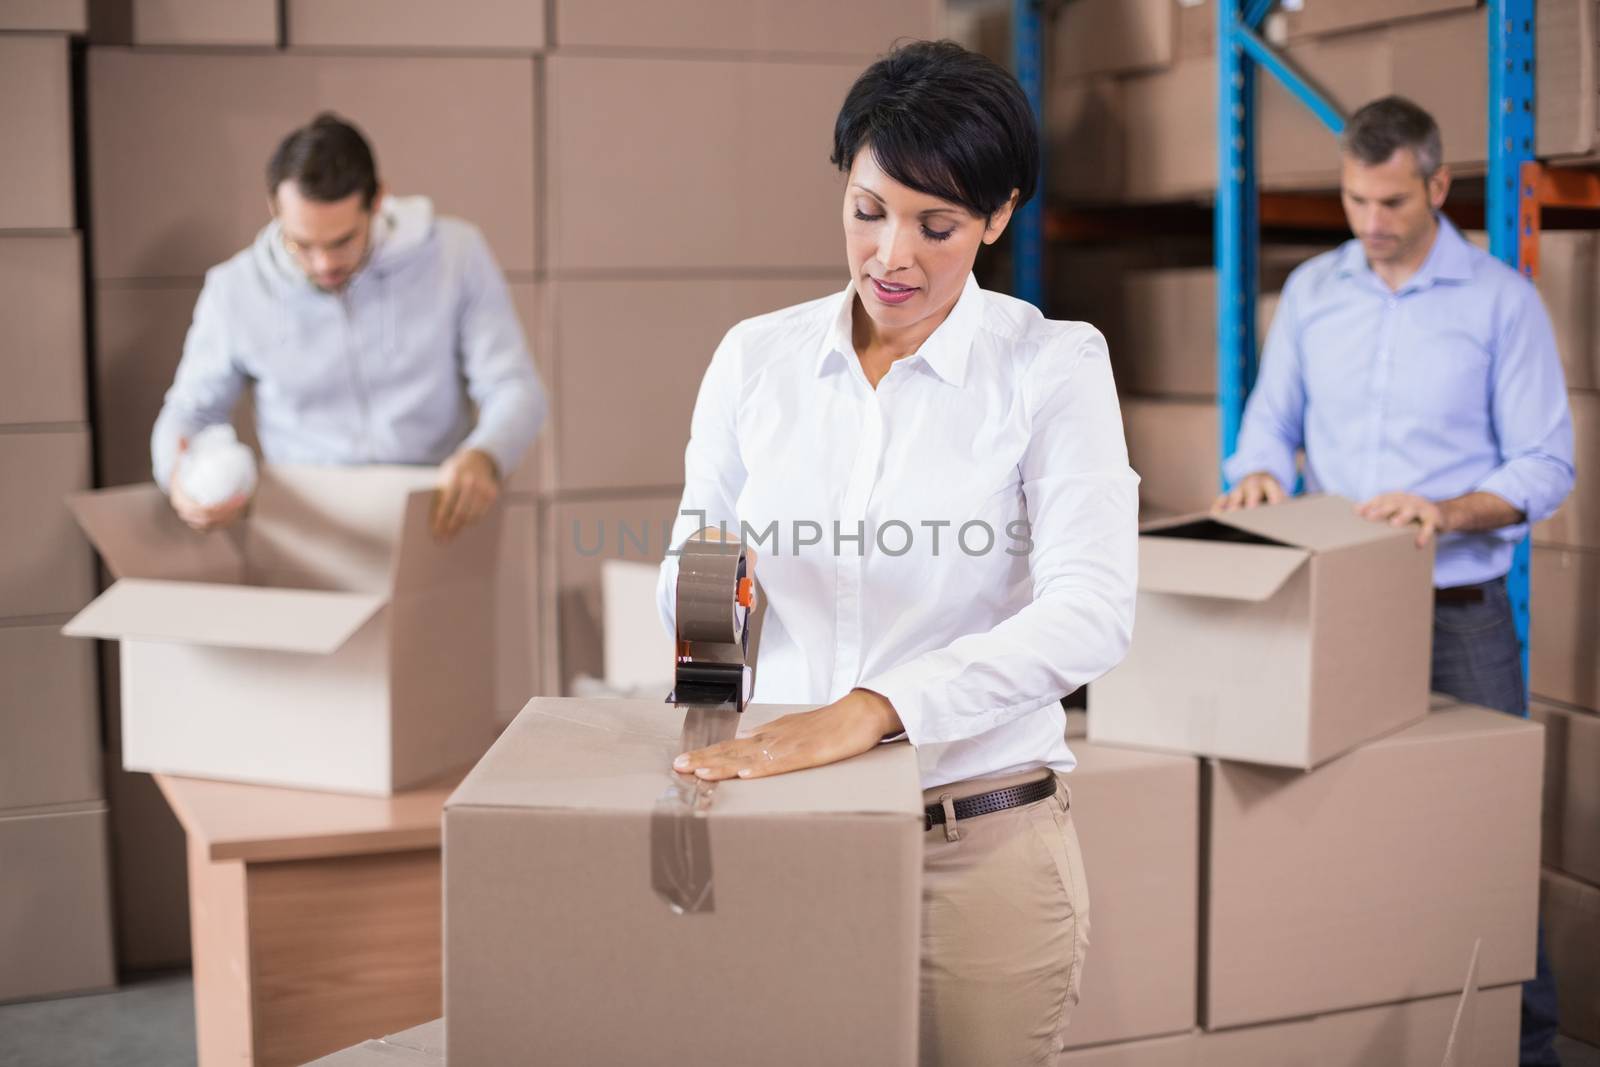 Warehouse workers packing up boxes in a large warehouse